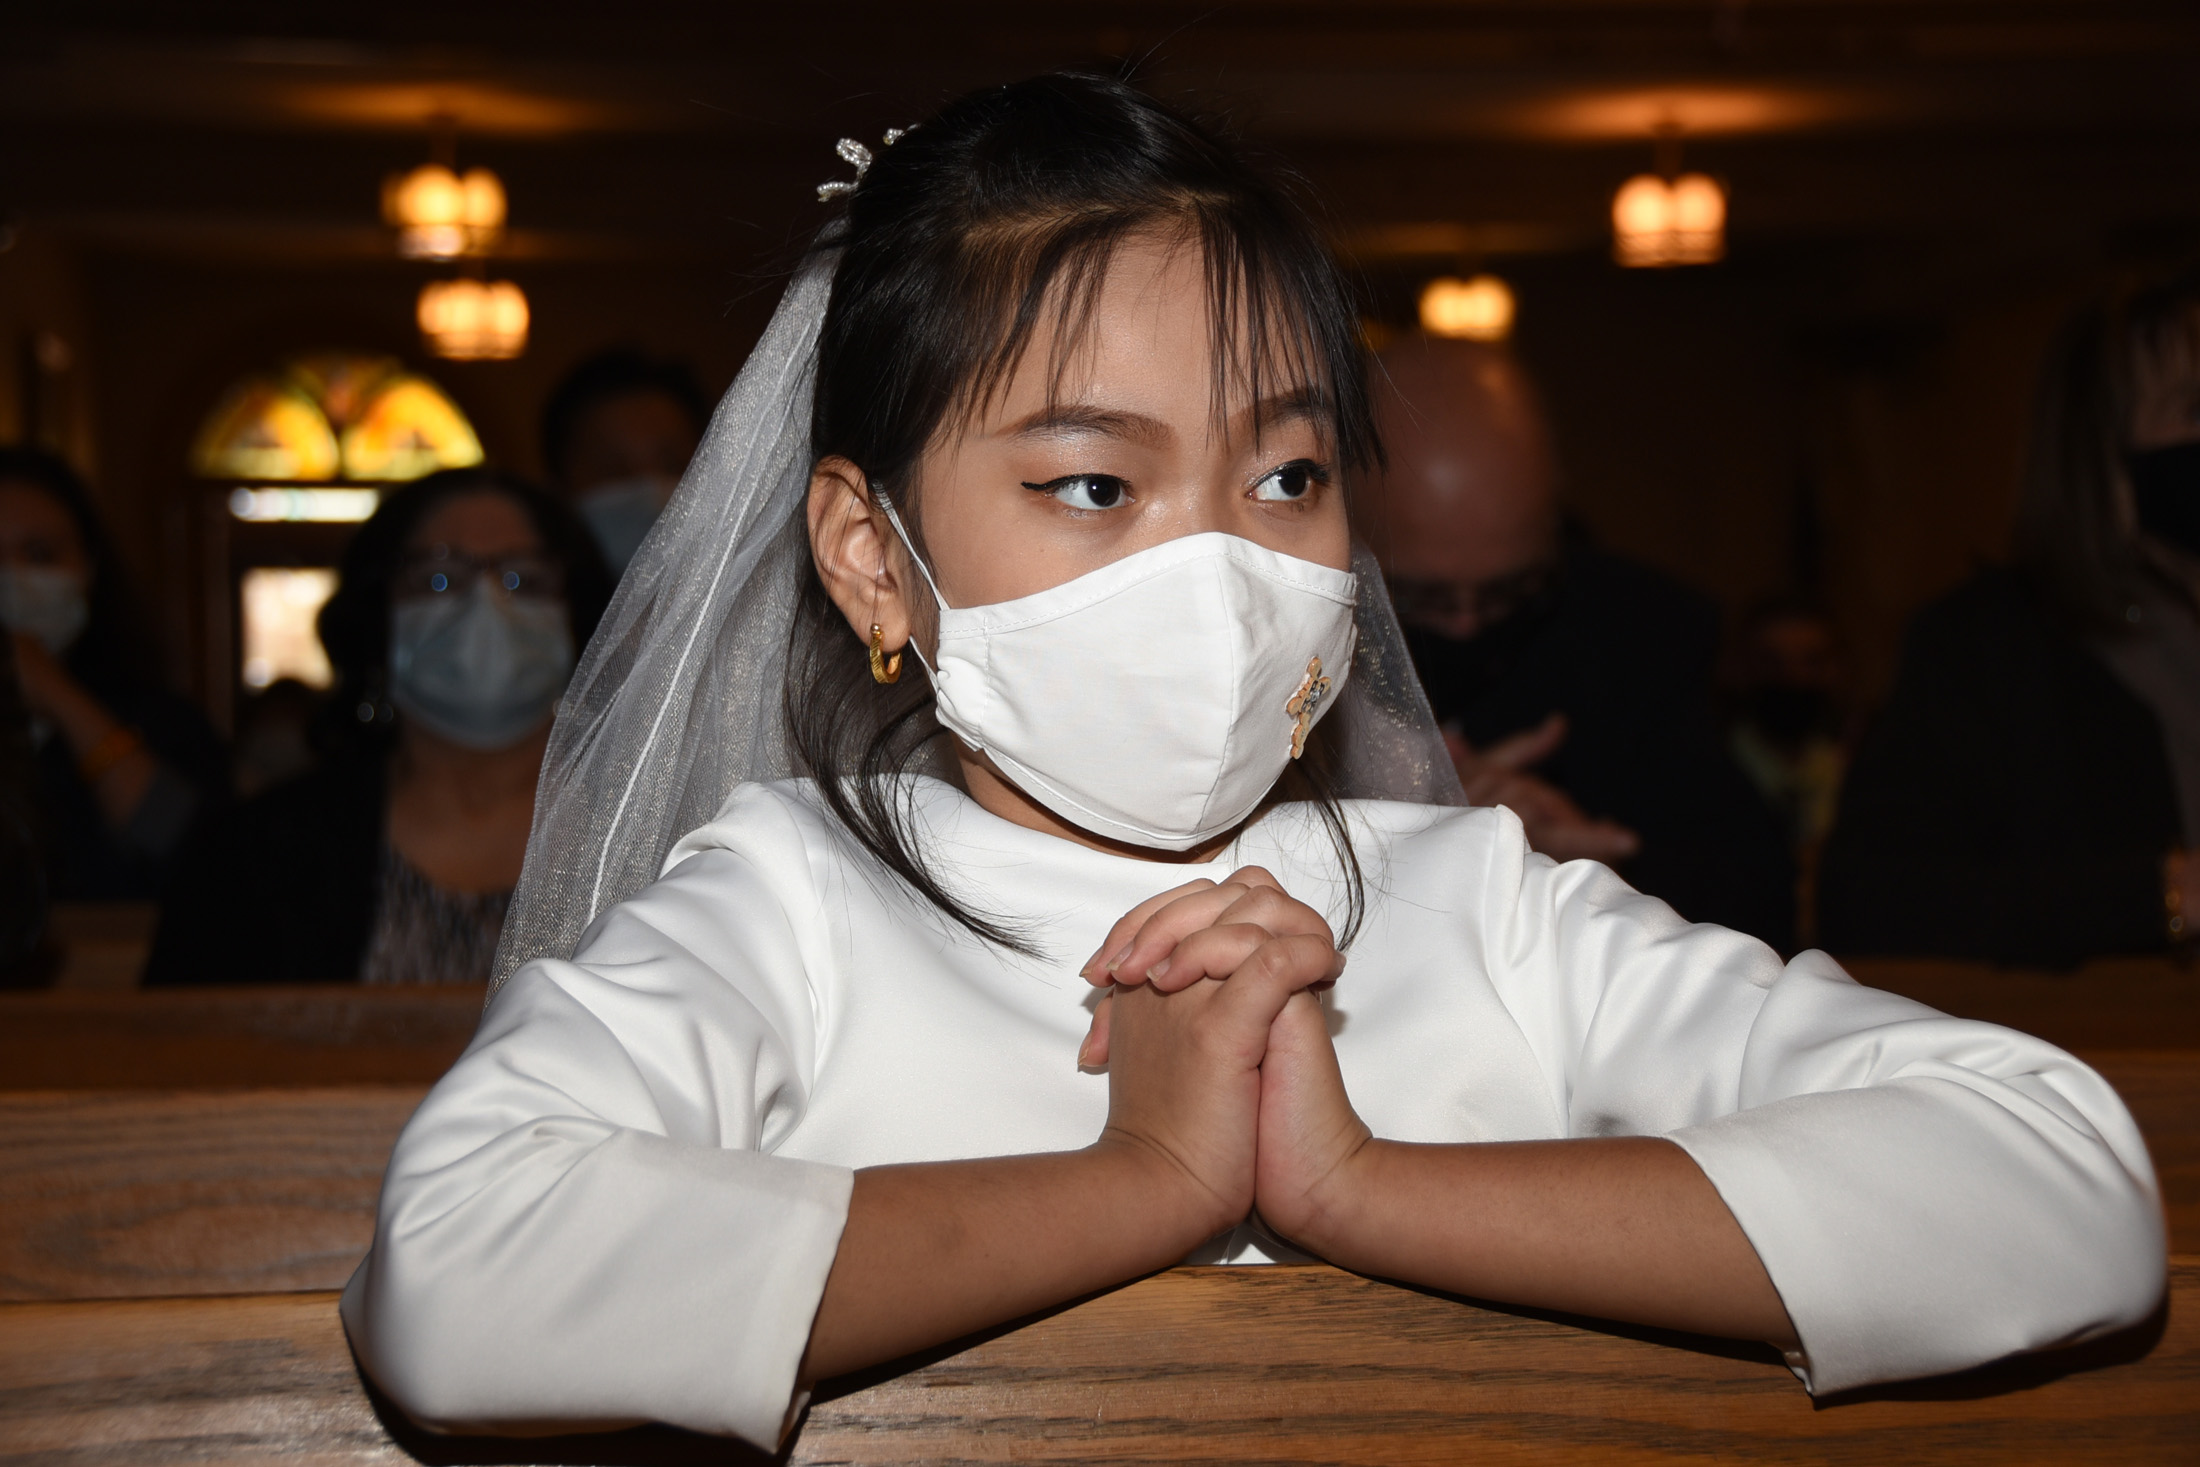 FIRST-COMMUNION-MAY-2-2021-1001001082